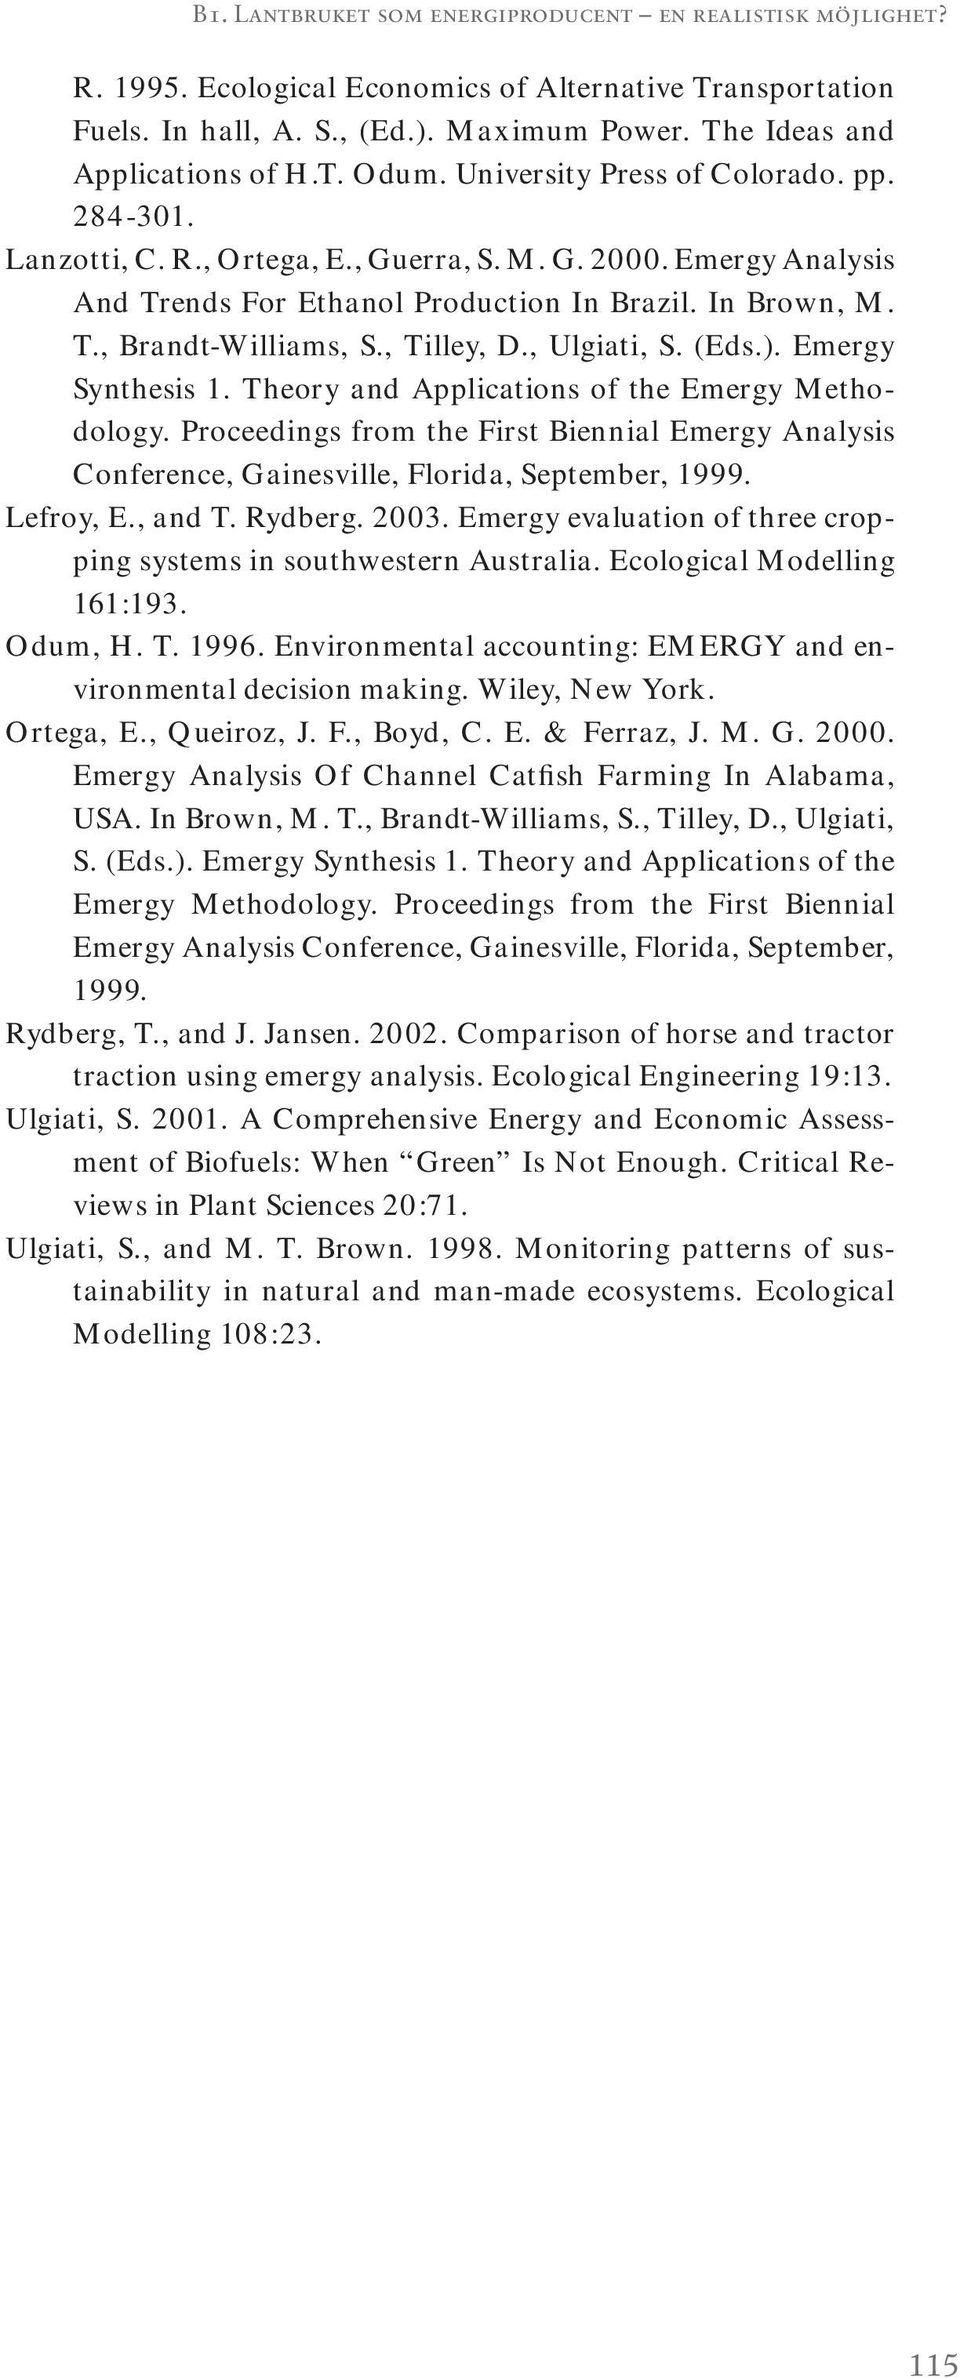 Emergy Synthesis 1. Theory and Applications of the Emergy Methodology. Proceedings from the First Biennial Emergy Analysis Conference, Gainesville, Florida, September, 1999. Lefroy, E., and T.